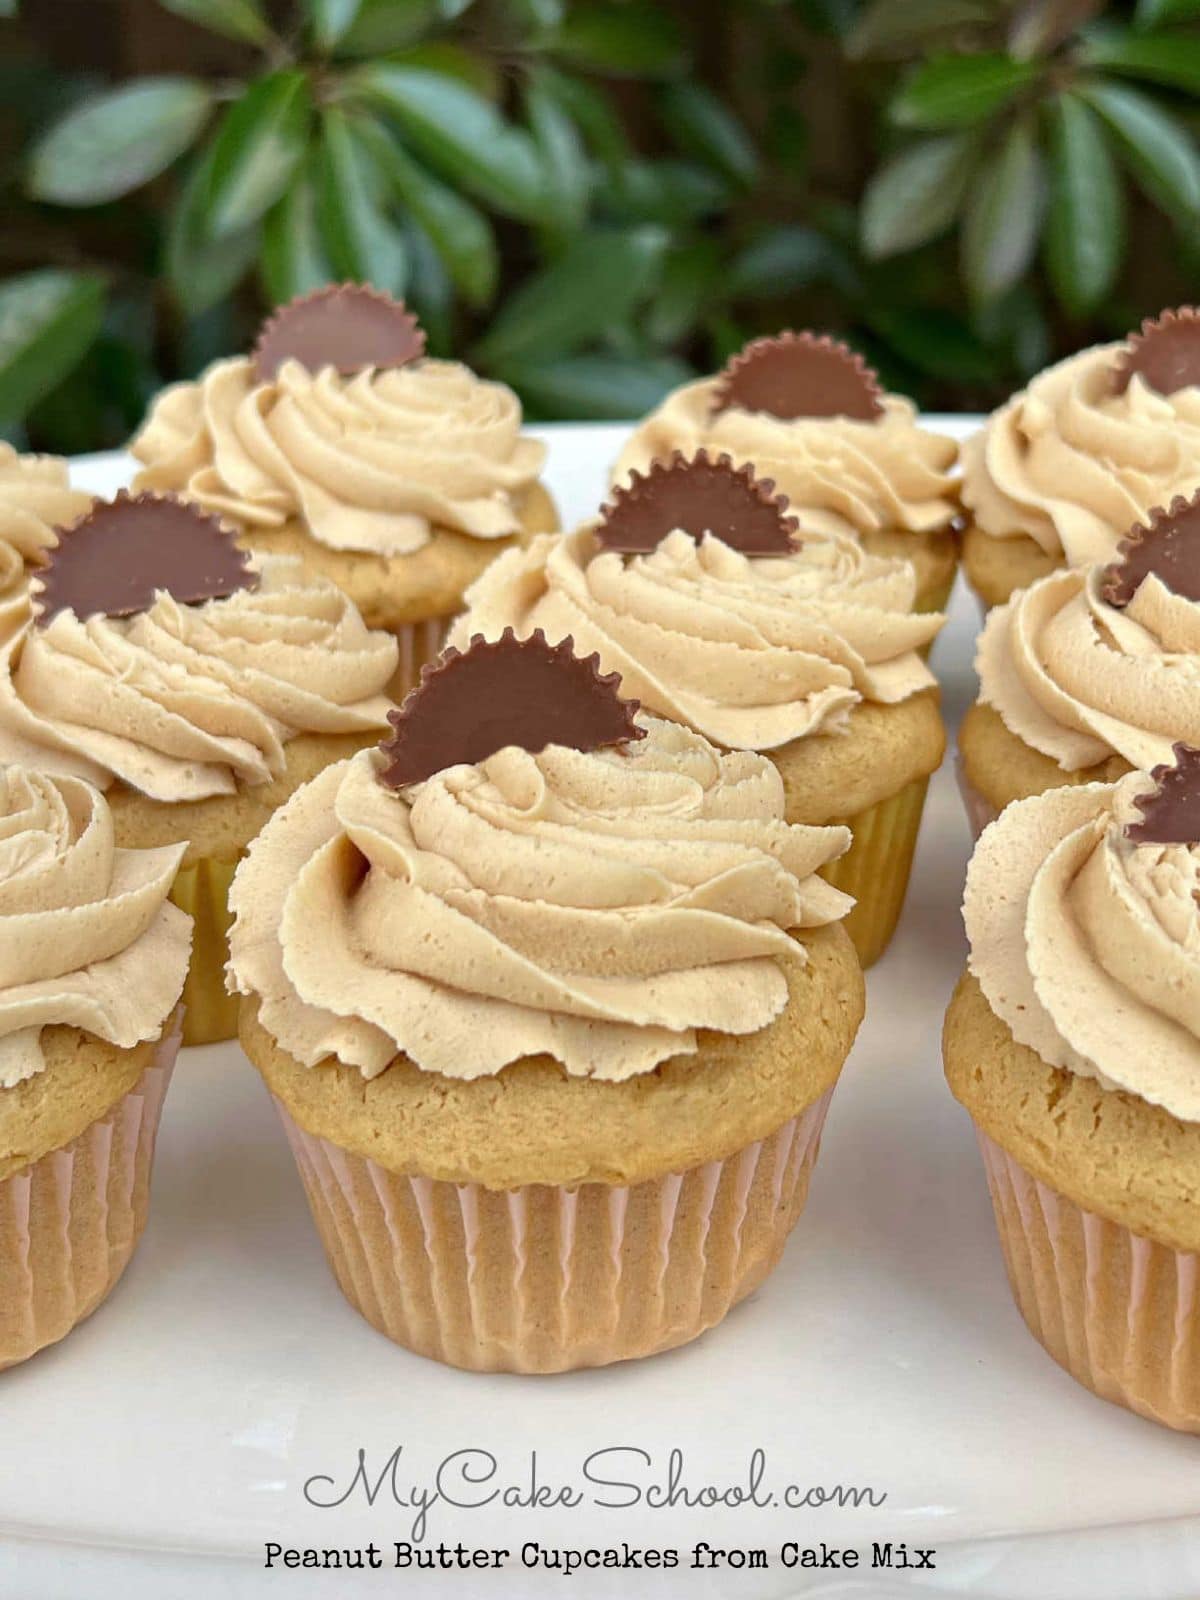 Peanut Butter Cupcakes on a Cake Platter, topped with Reese's Cups.